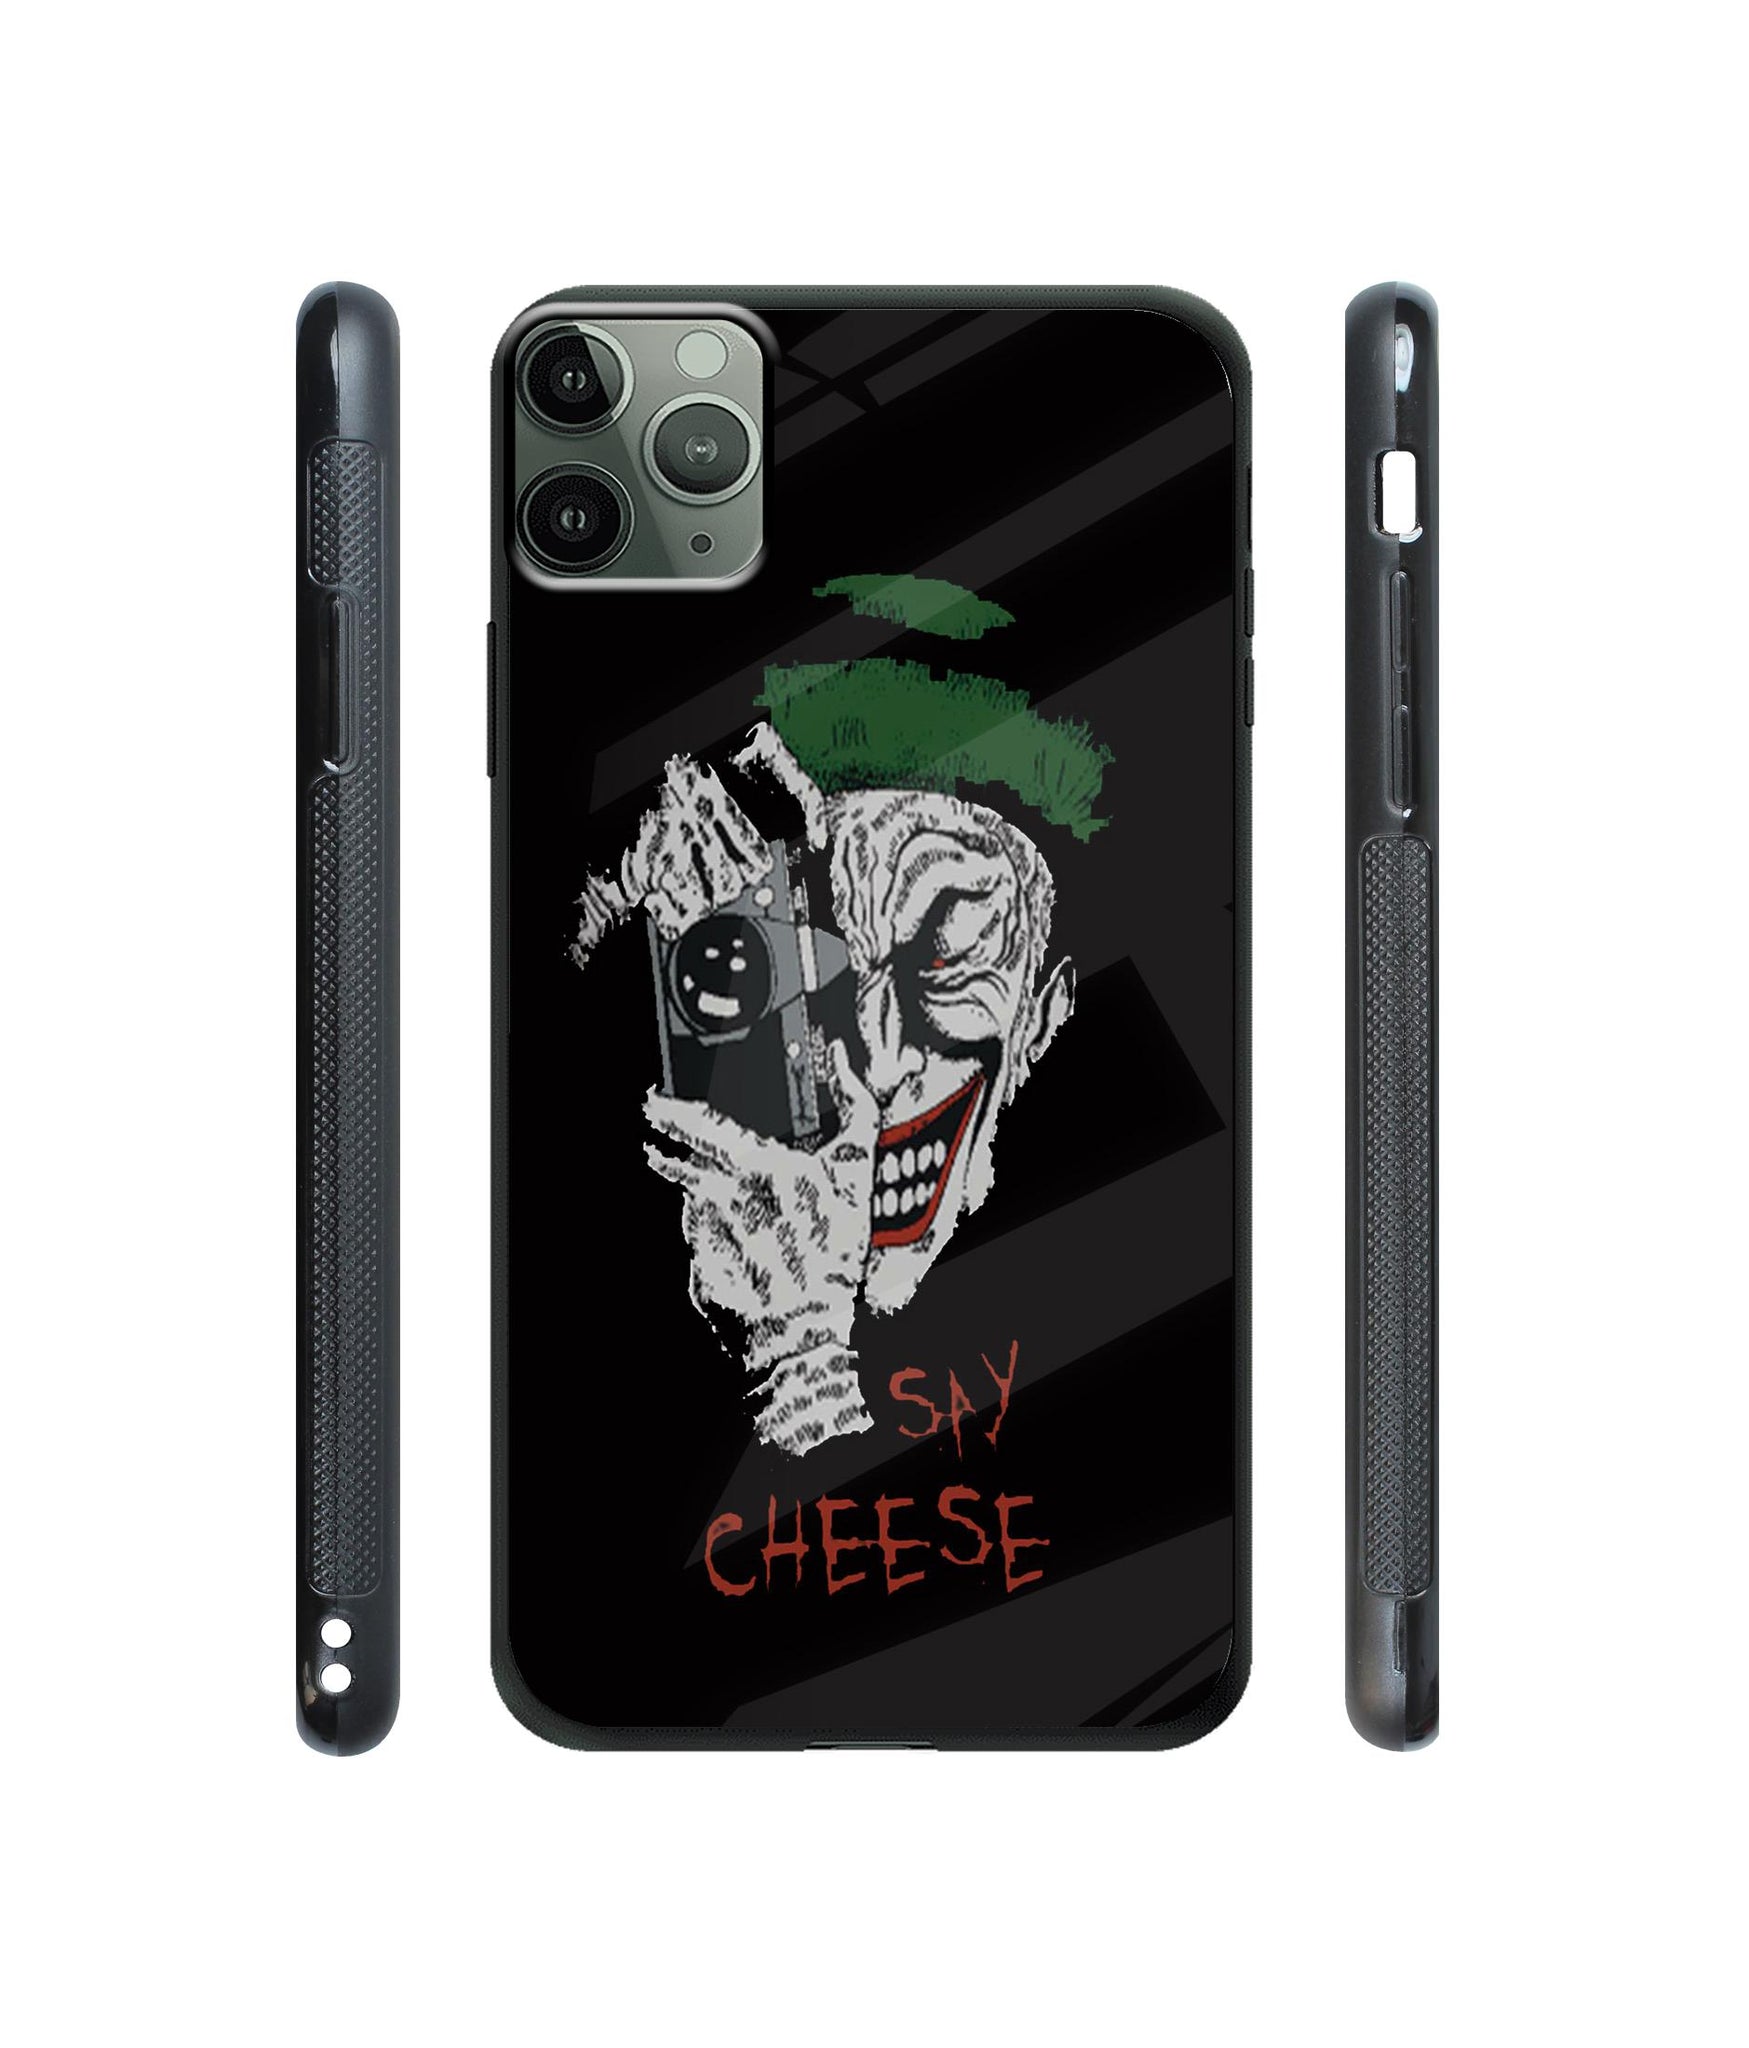 Joker Say Cheese Designer Printed Glass Cover for Apple iPhone 11 Pro